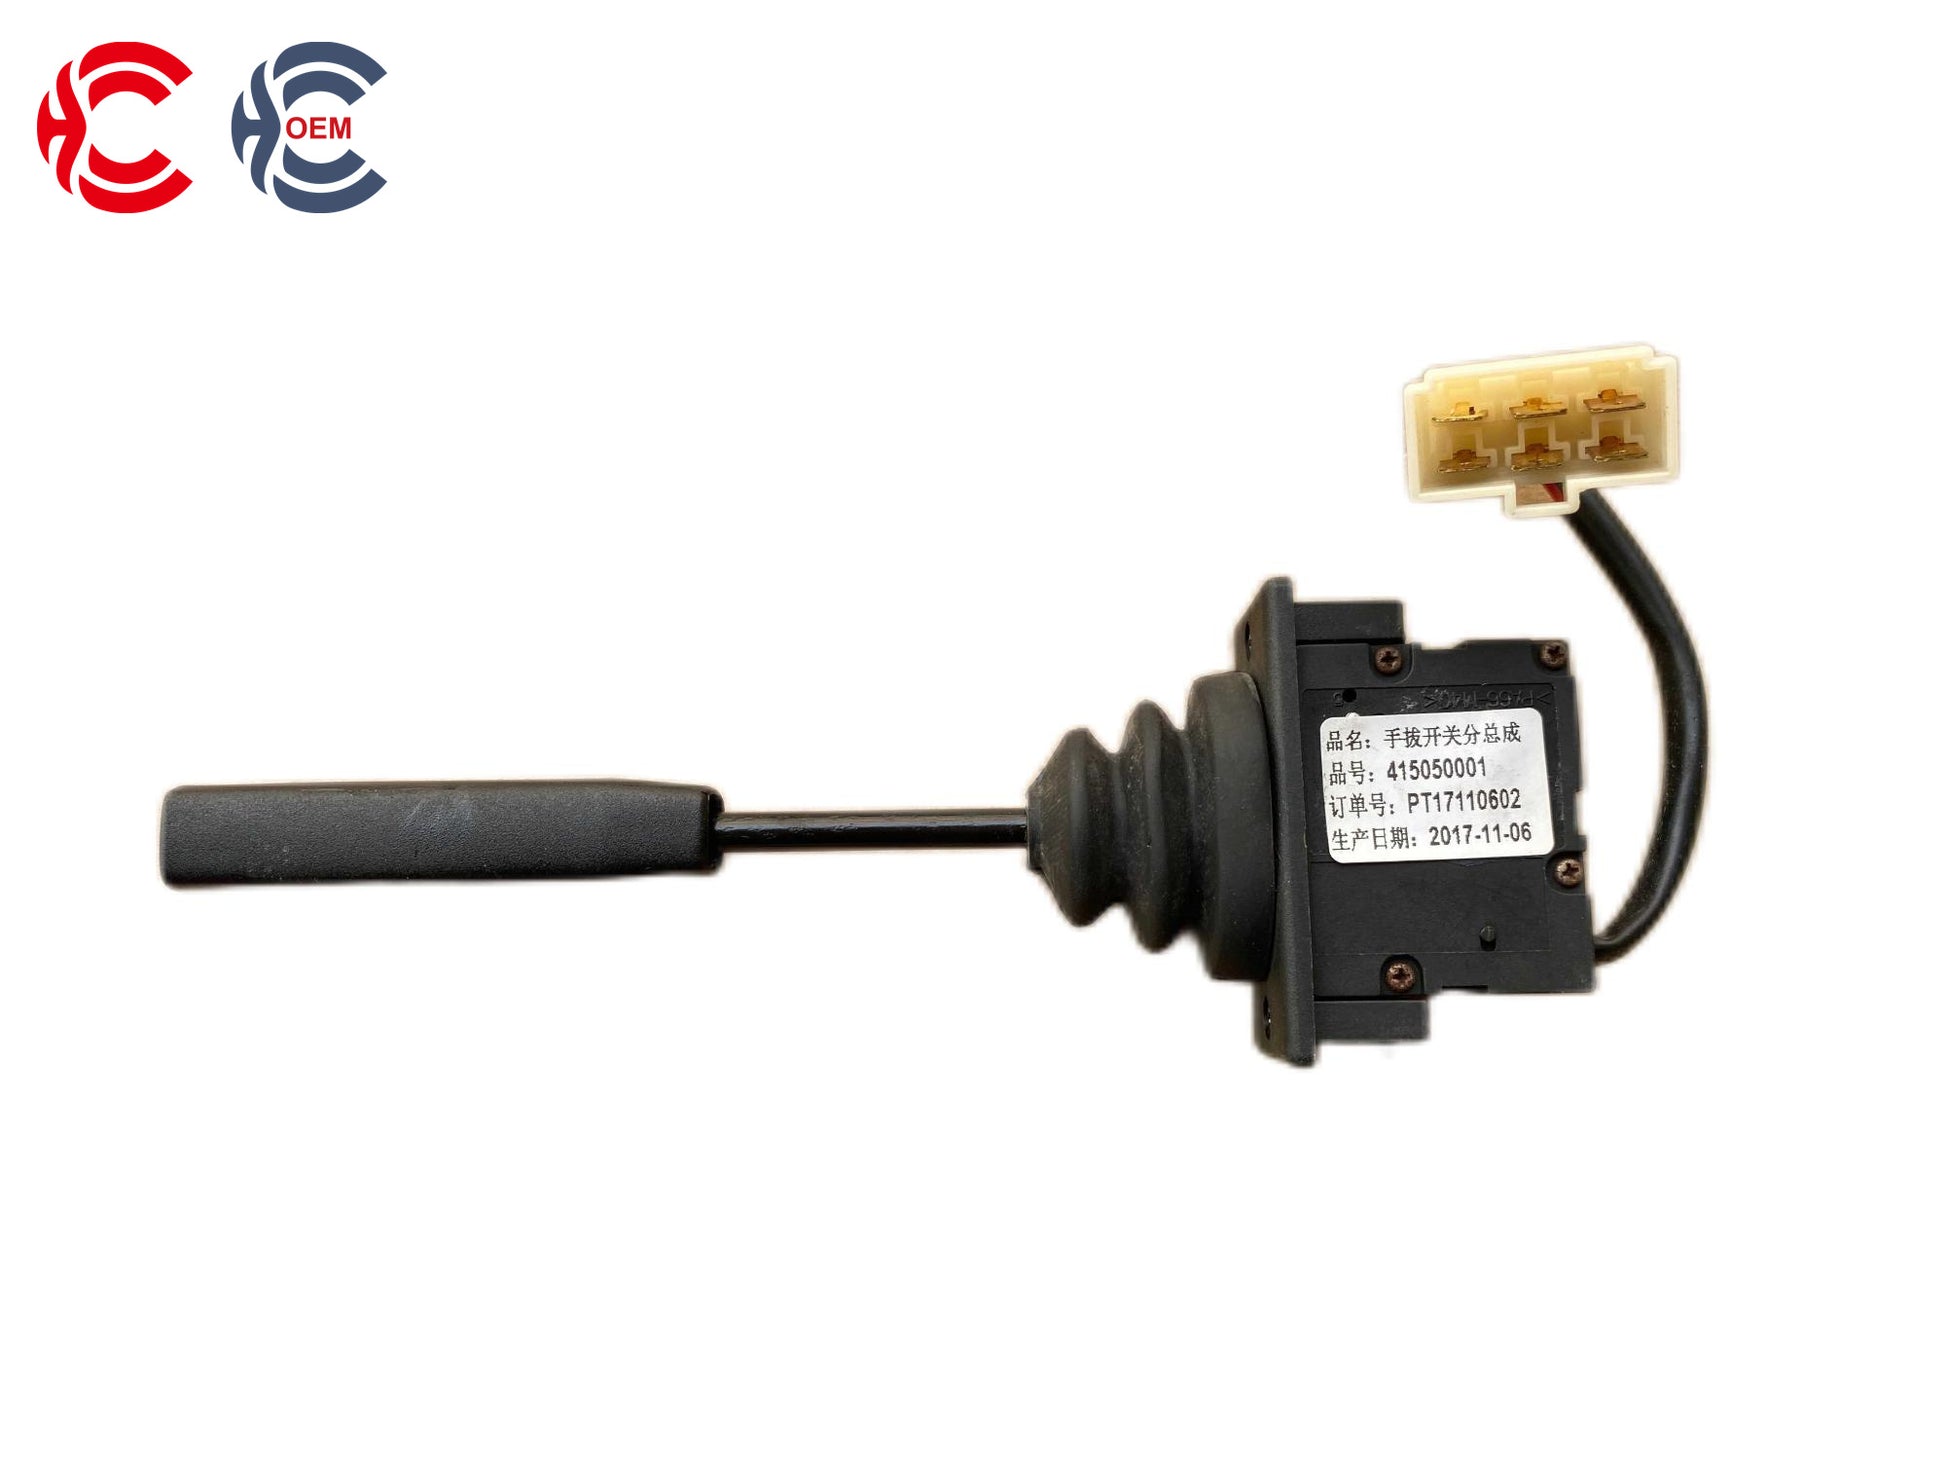 OEM: 415050001Material: ABS MetalColor: Black SilverOrigin: Made in ChinaWeight: 200gPacking List: 1* Retarder Handle Switch More ServiceWe can provide OEM Manufacturing serviceWe can Be your one-step solution for Auto PartsWe can provide technical scheme for you Feel Free to Contact Us, We will get back to you as soon as possible.